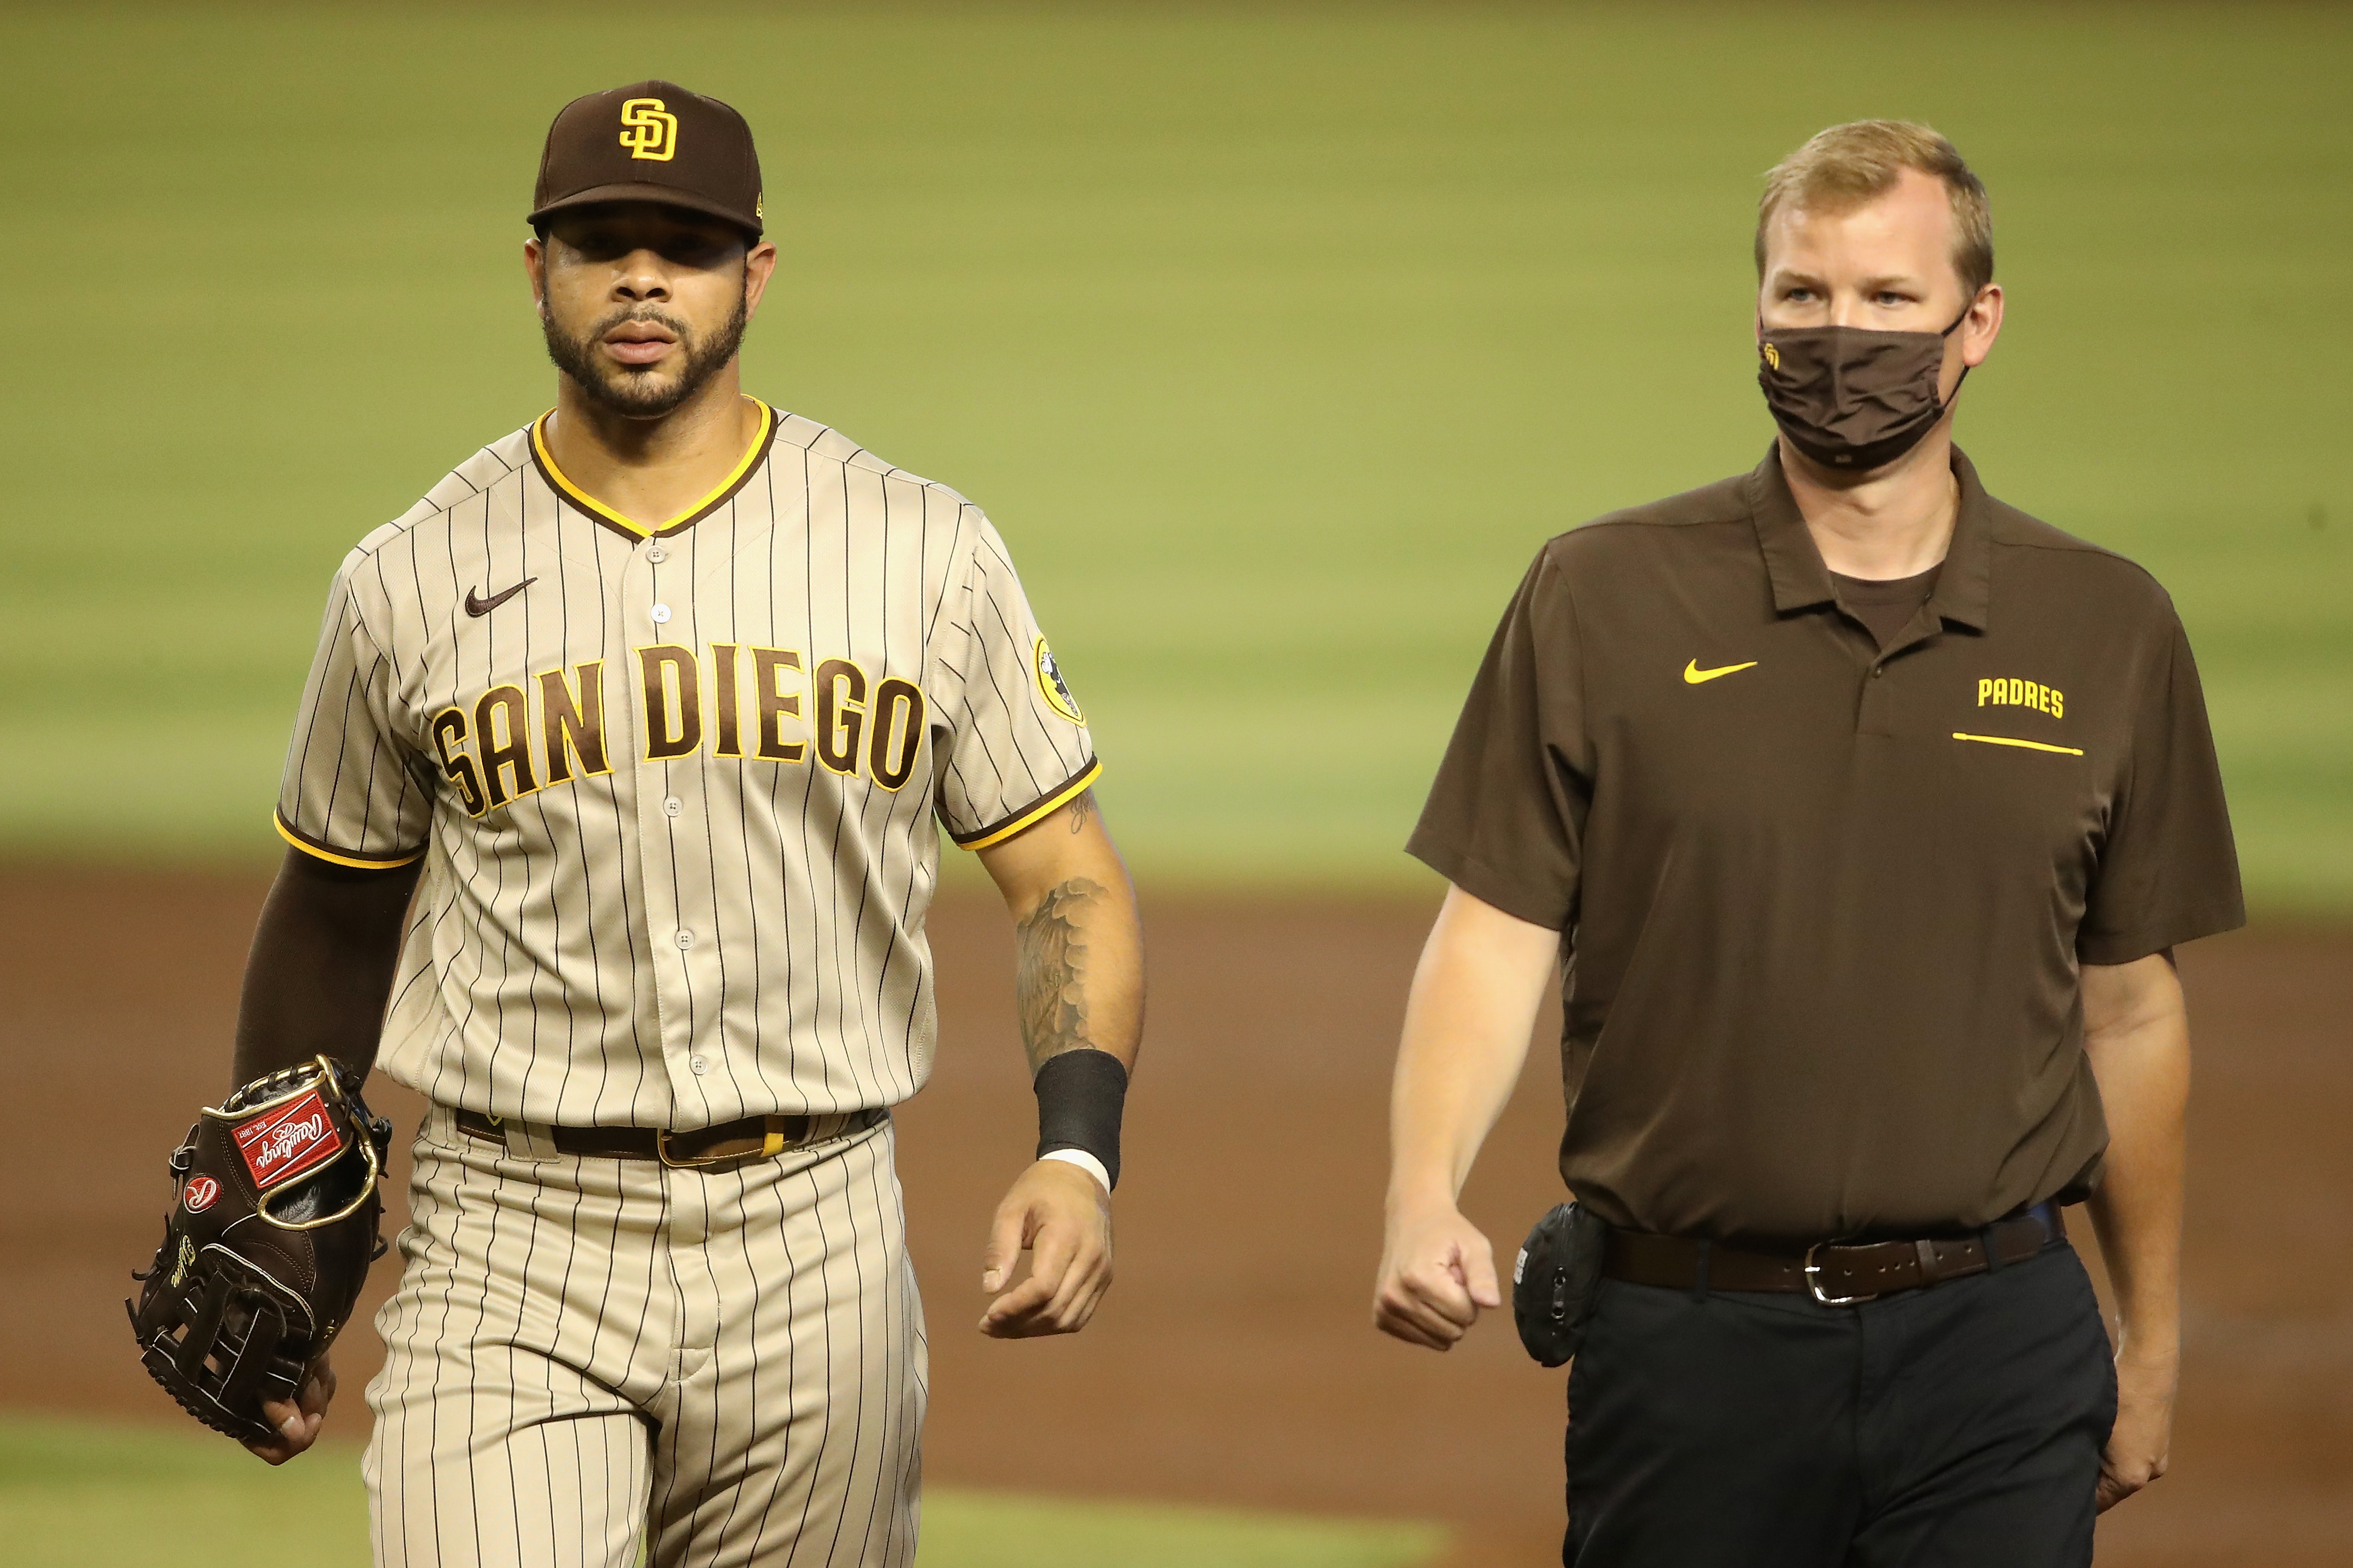 Spotlight turns to baseball and Padres' weighty expectations